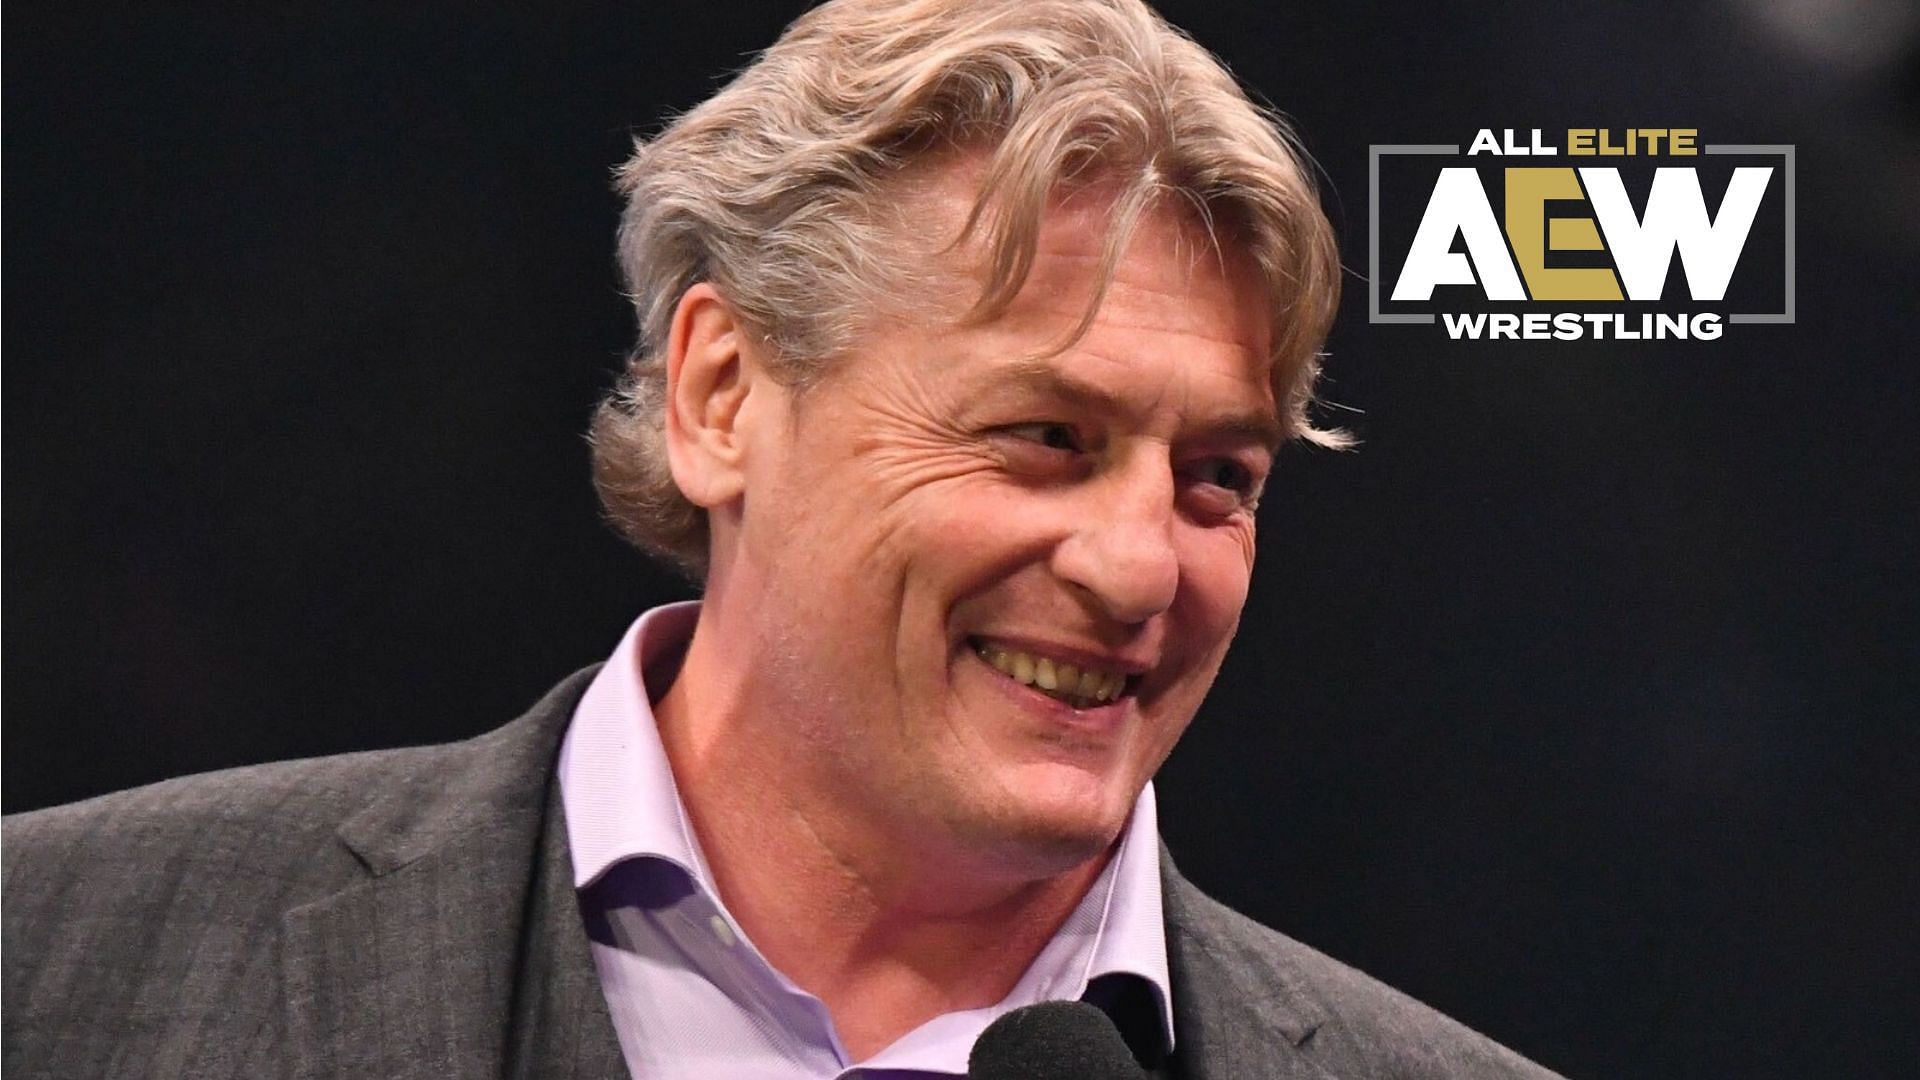 William Regal is a former NXT general manager